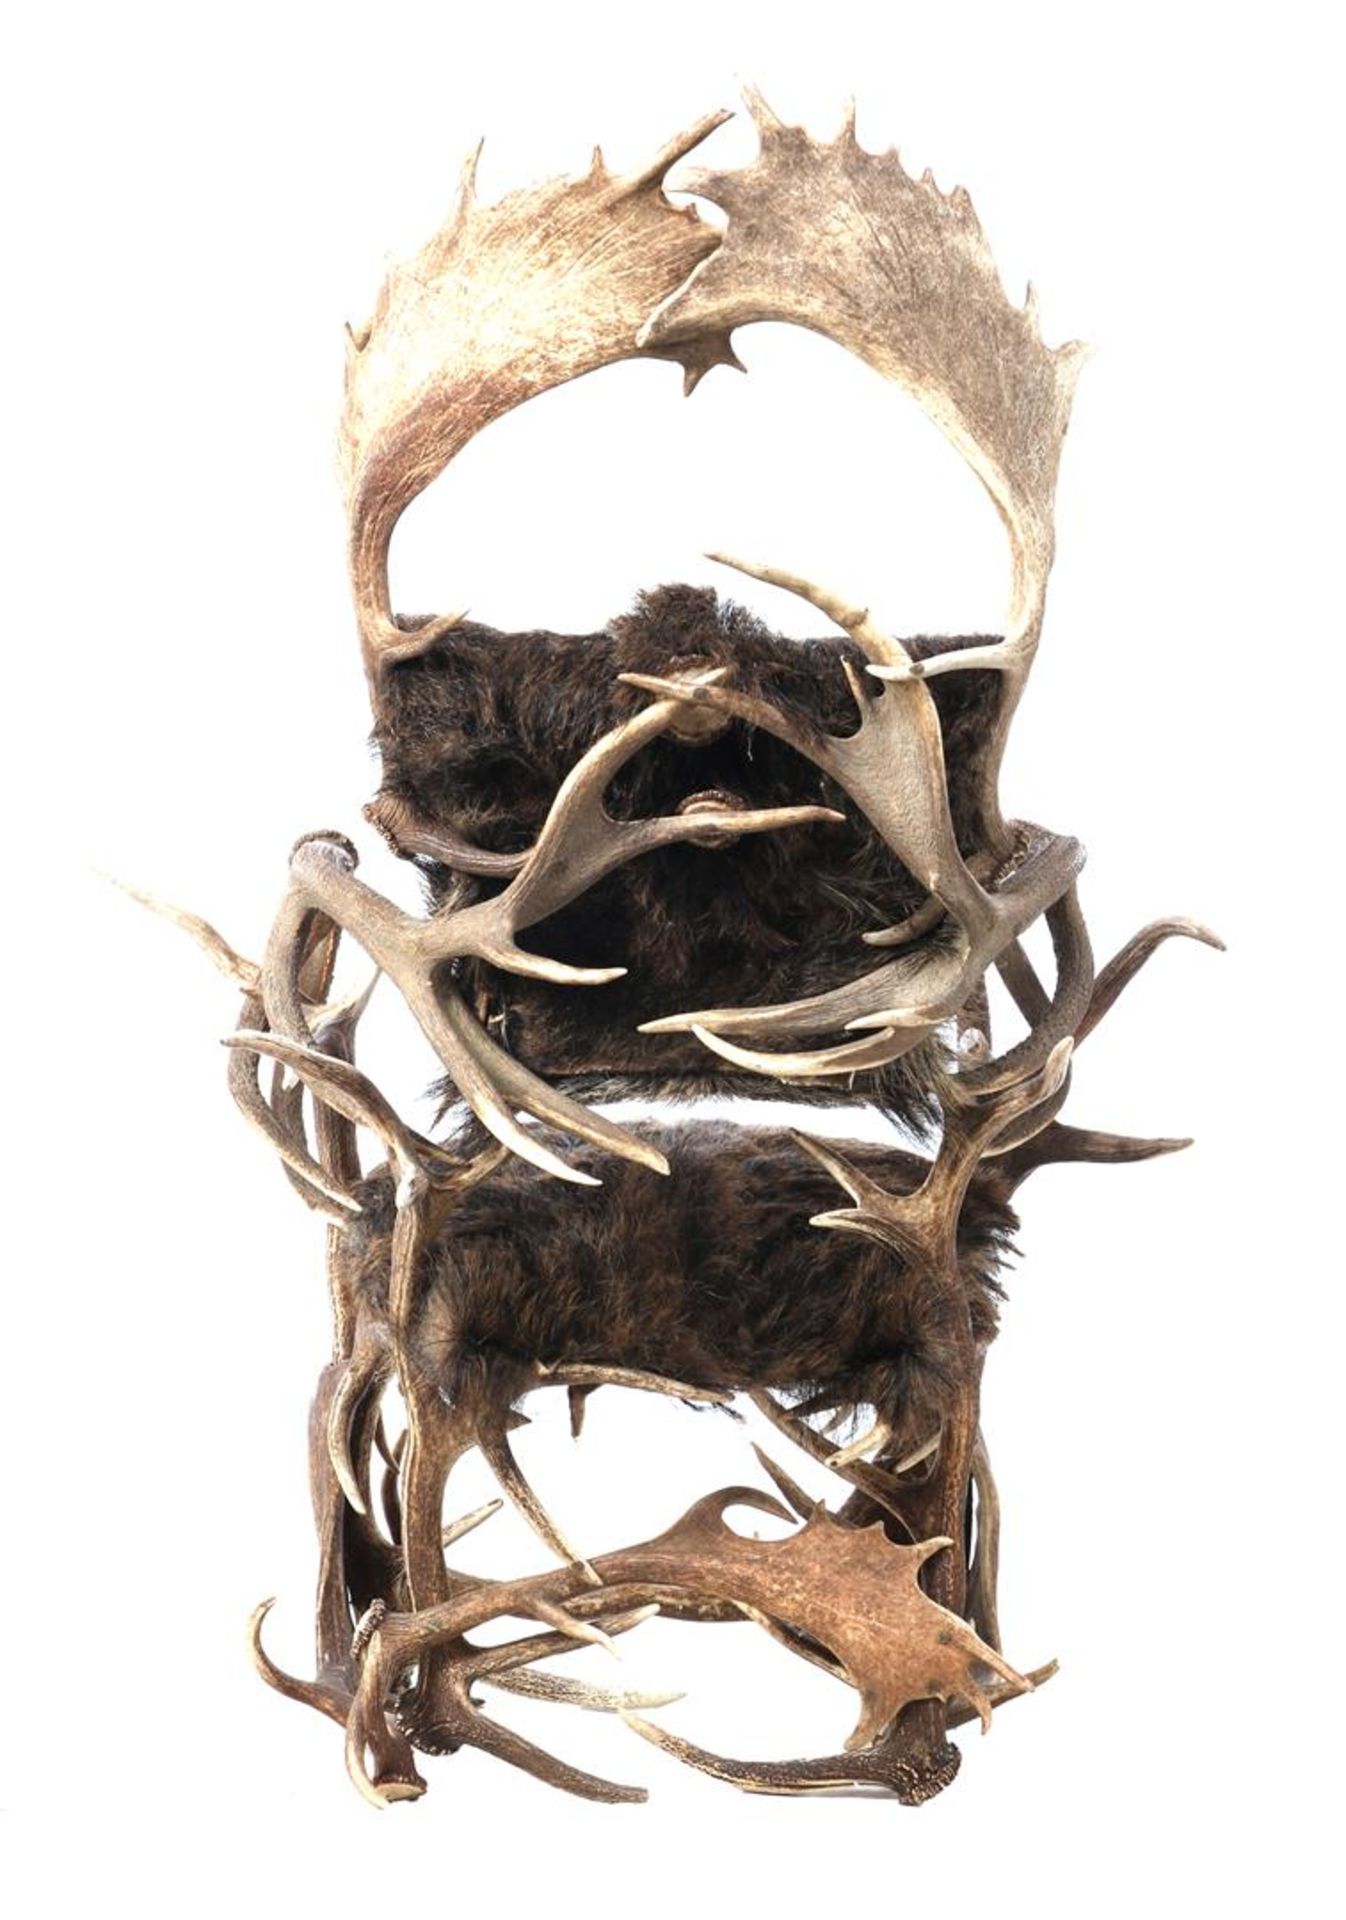 Armchair made of antlers and fur - Bild 3 aus 3